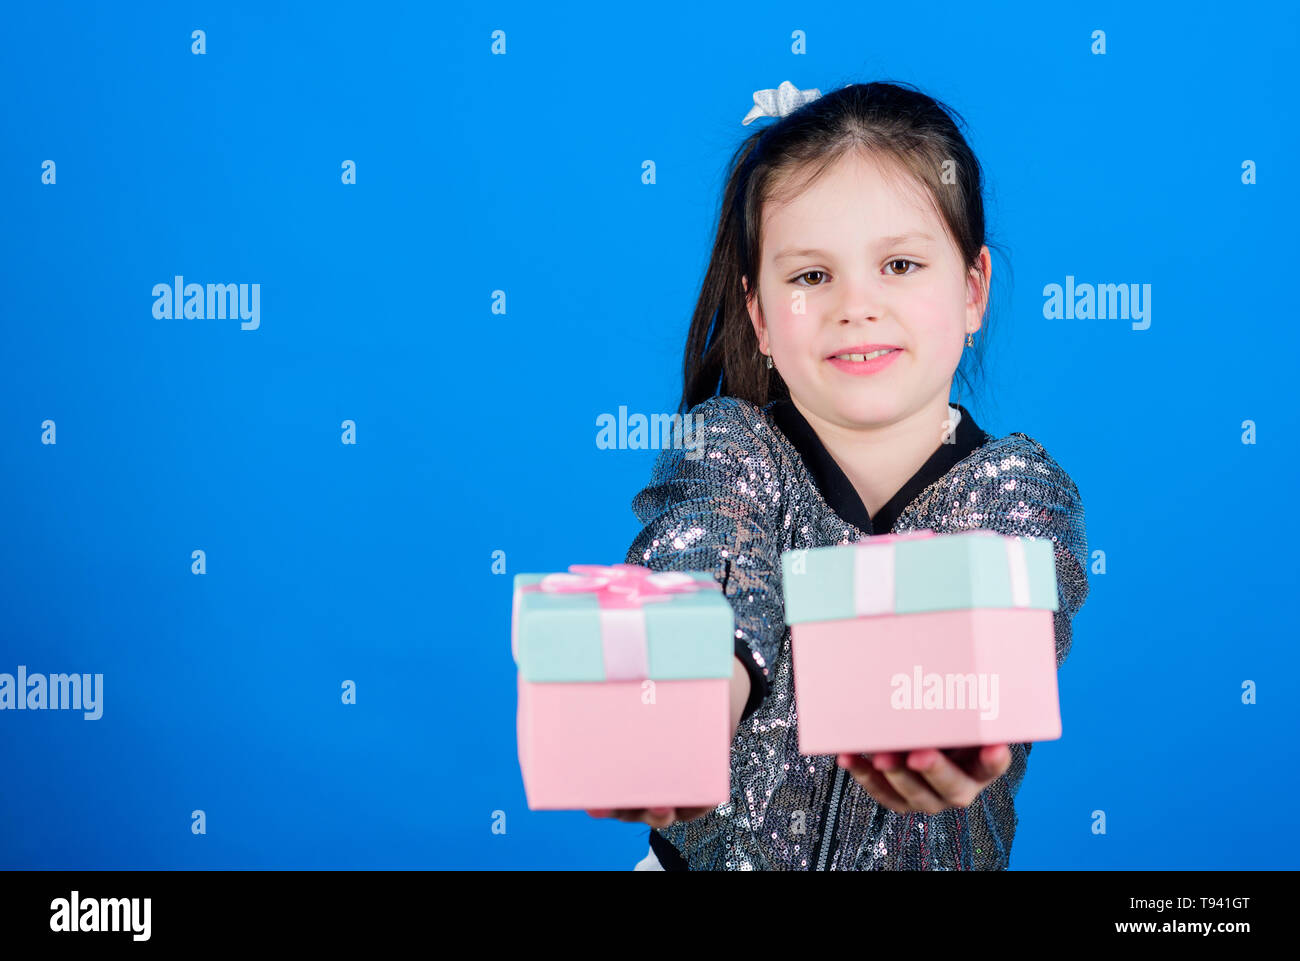 Girl with gift boxes blue background. Black friday. Shopping day. Cute child carry gift boxes. Surprise gift box. Birthday wish list. World of happiness. Special happens every day. Choose one. Stock Photo